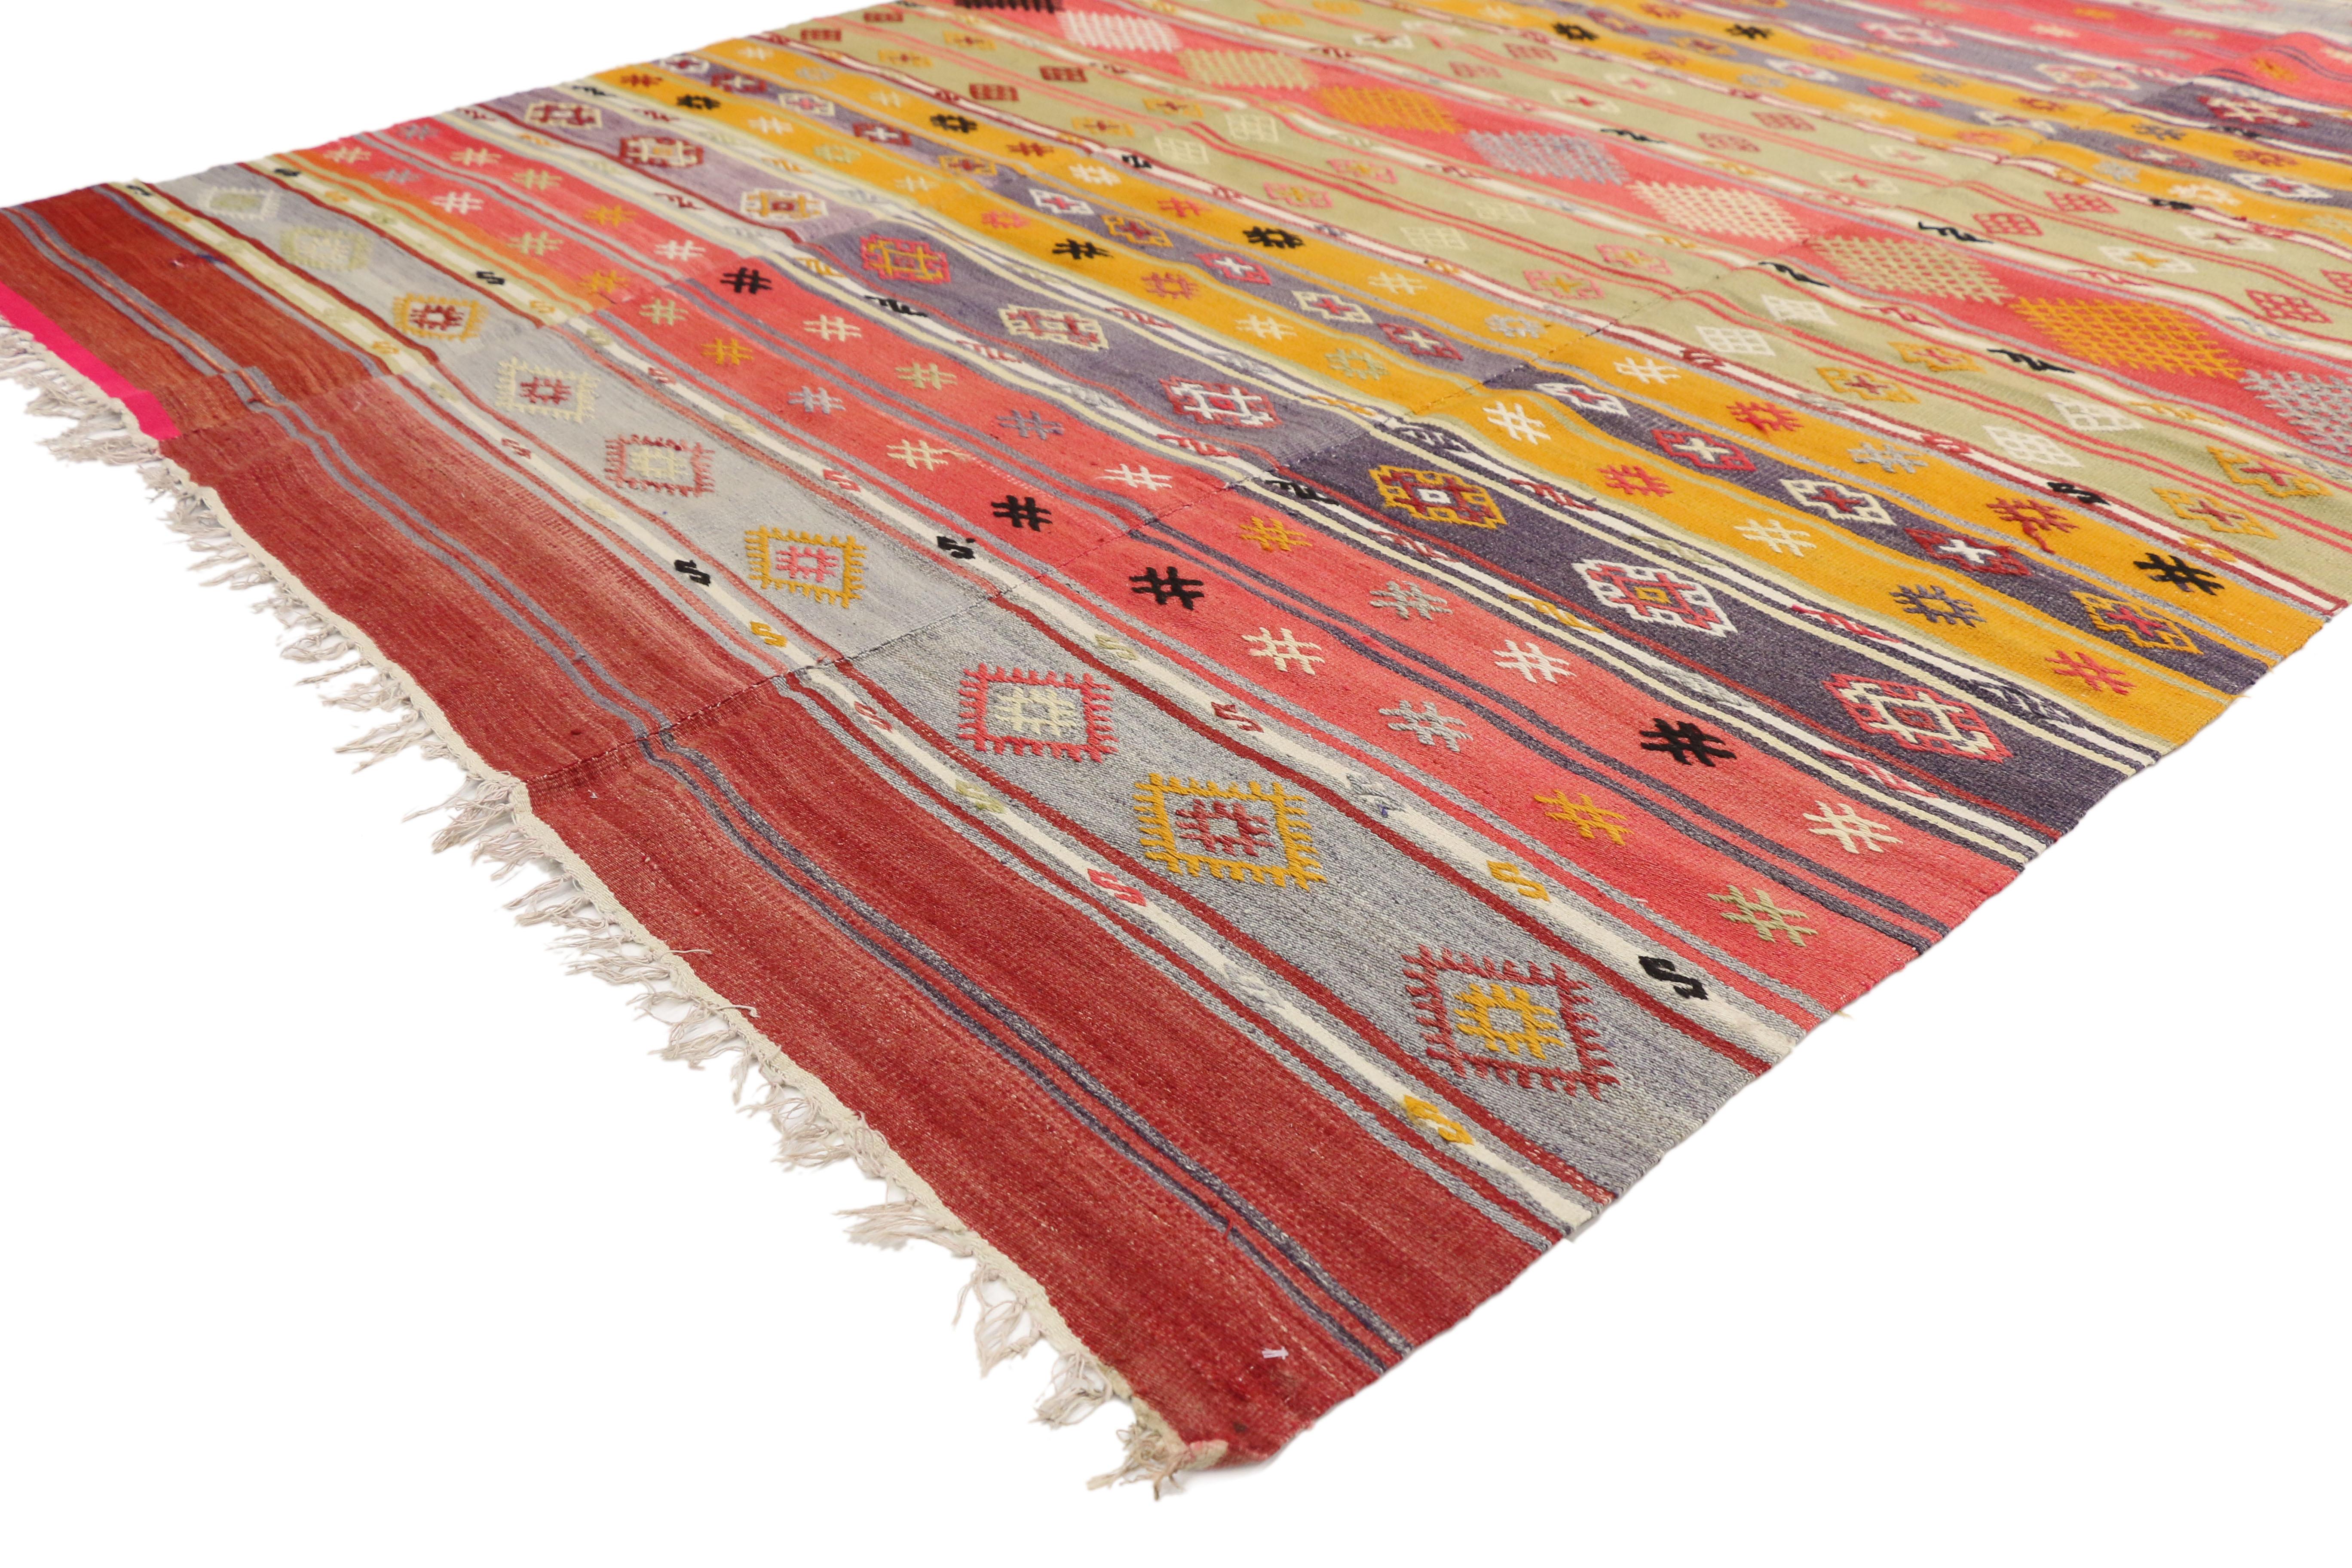 51275, vintage Turkish Kilim rug with tribal style boho chic flat-weave Kilim rug. This colorful handwoven wool vintage Turkish Kilim, flat-weave rug features stripes and geometric motifs. Rendered in variegated shades of ruby red, brick red, ruby